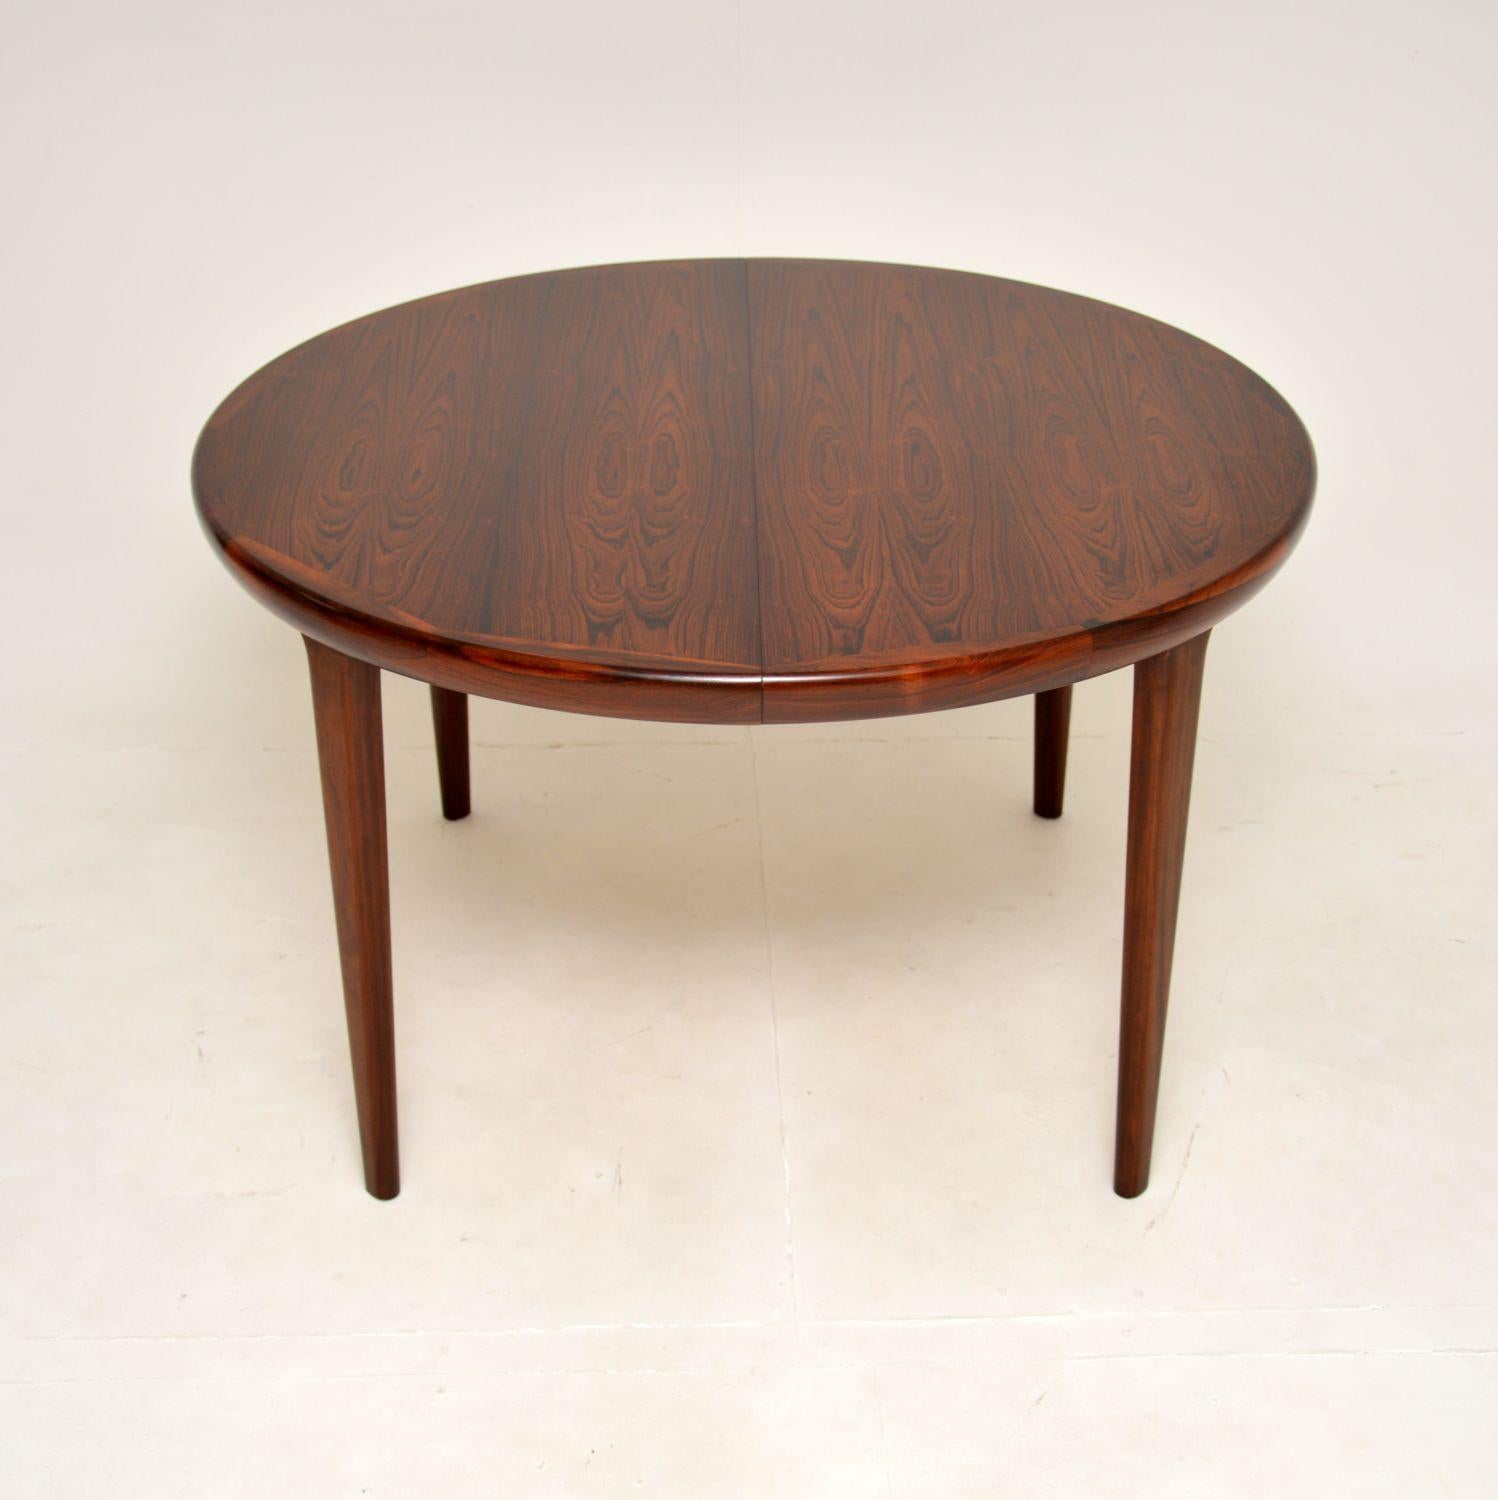 Mid-20th Century Danish Vintage Extending Dining Table